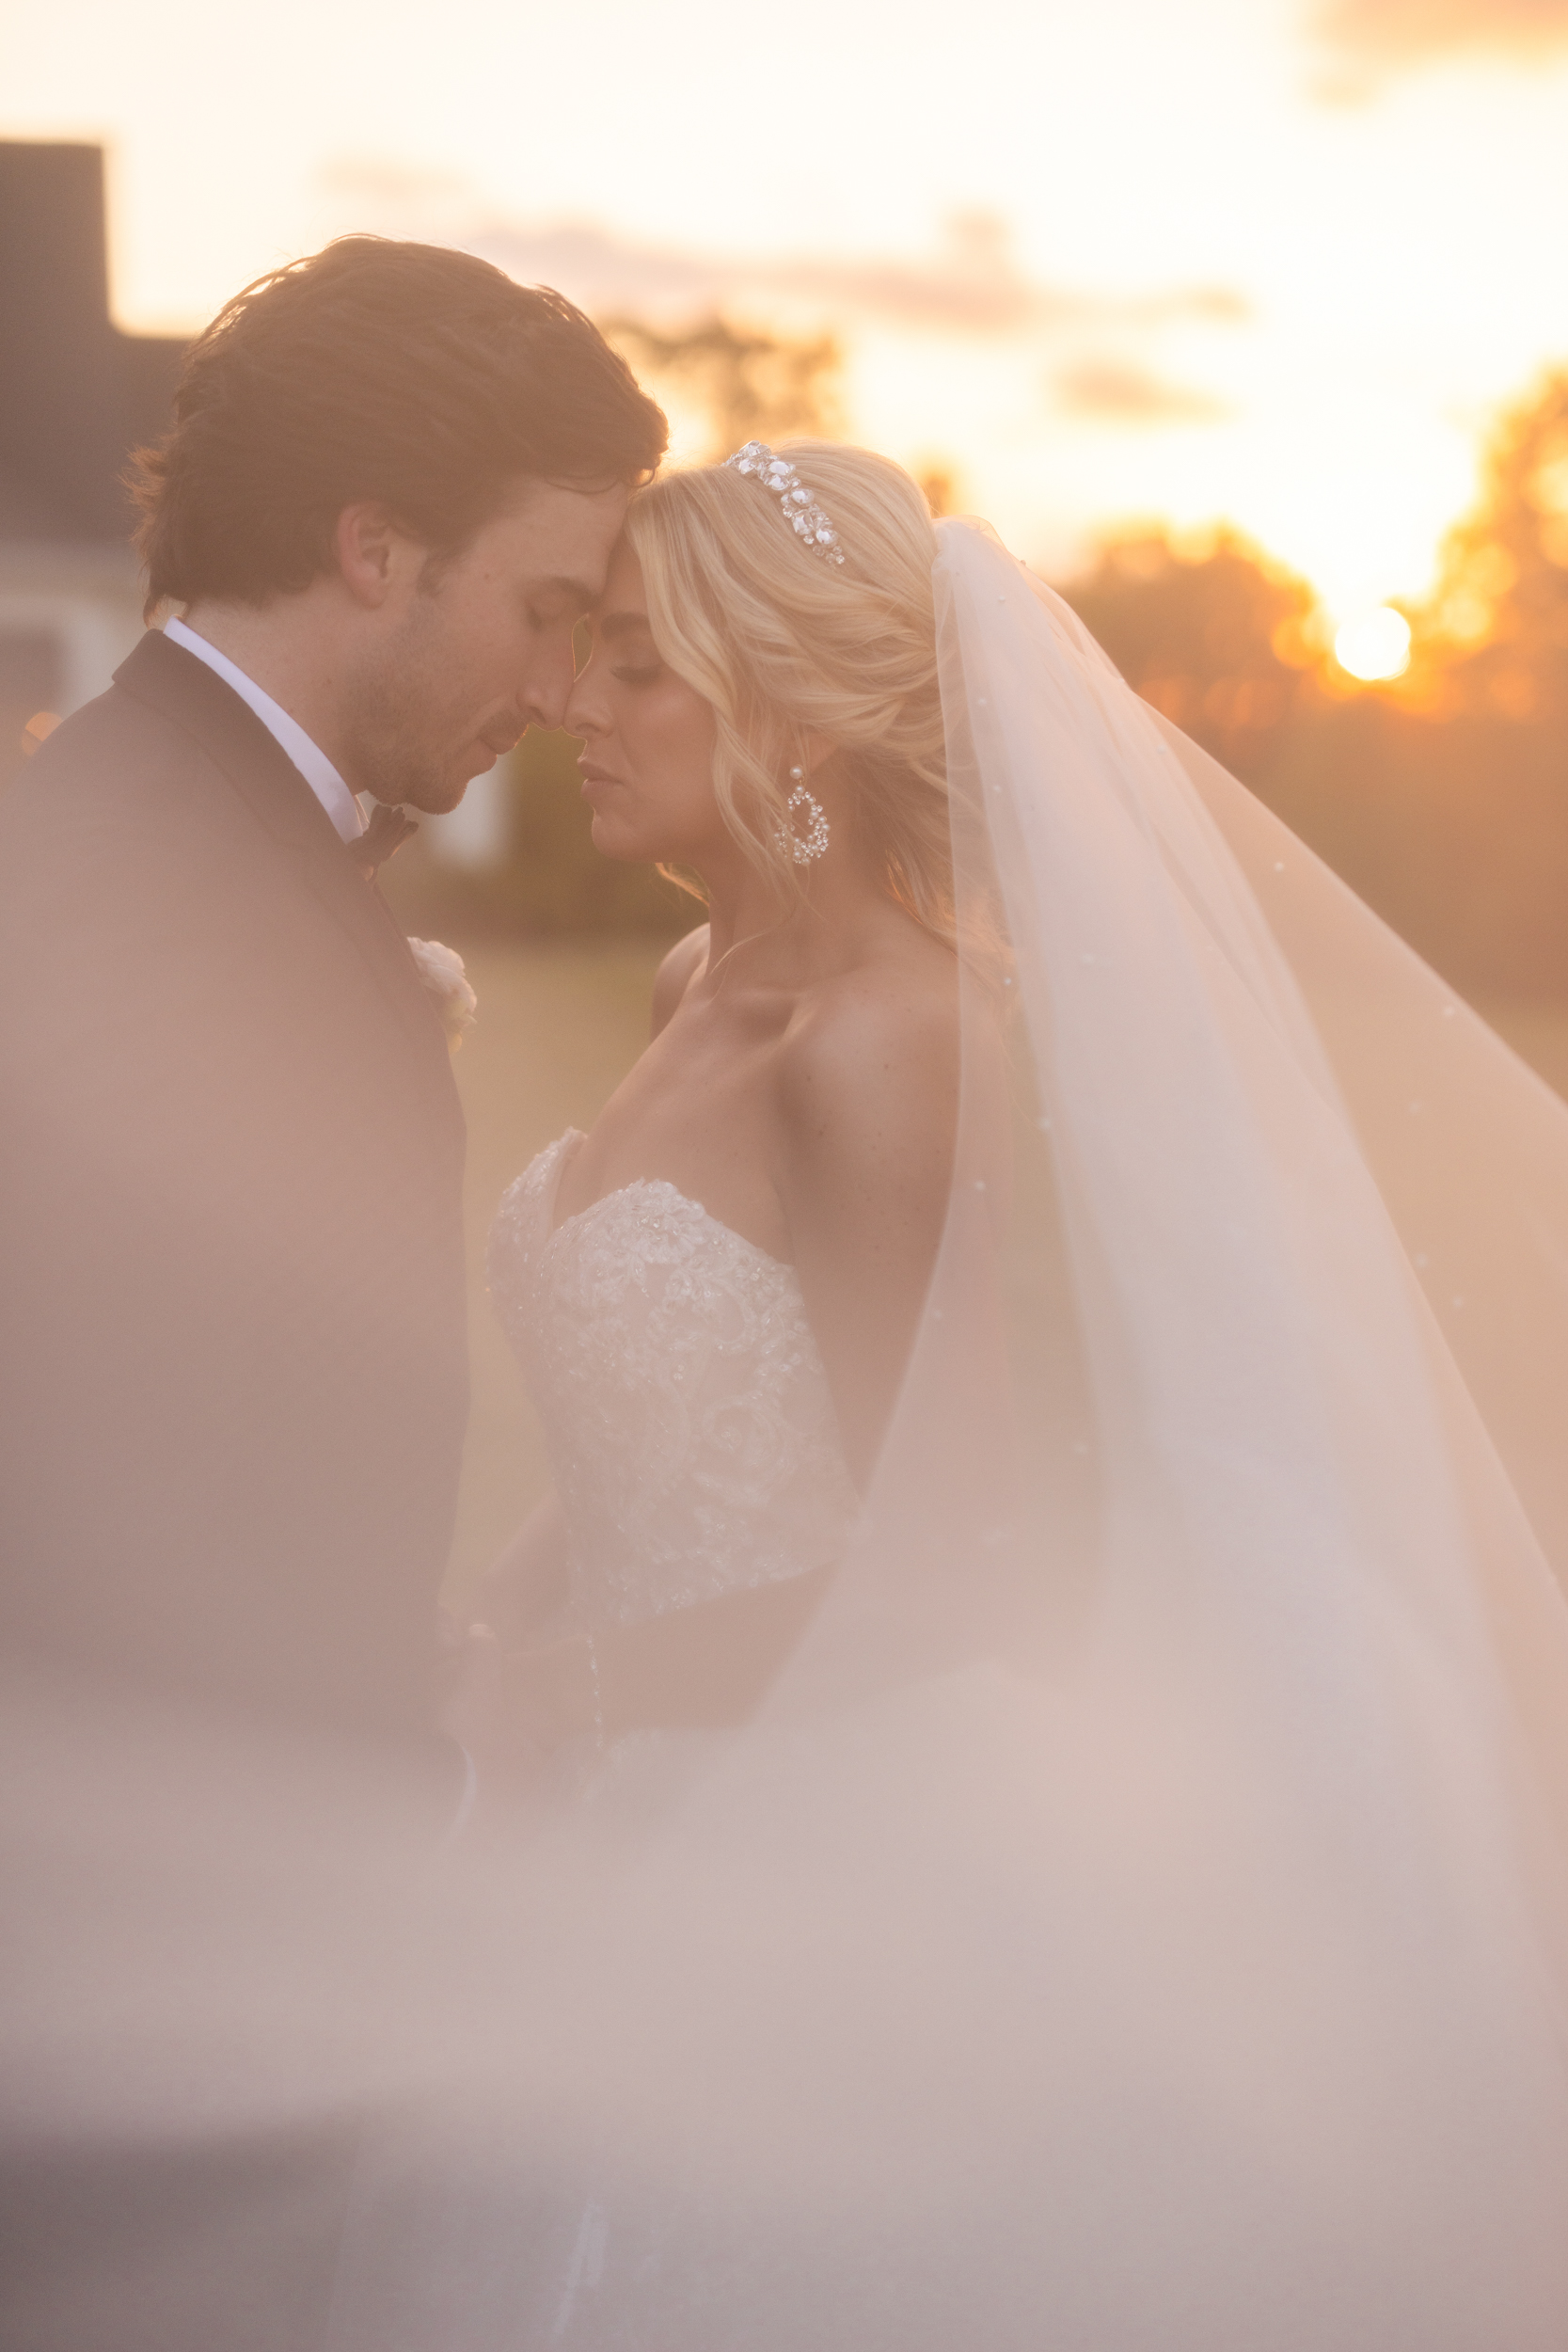 Bride and groom during a golden hour sunset at Castle Hill wedding venue in Oxford MS